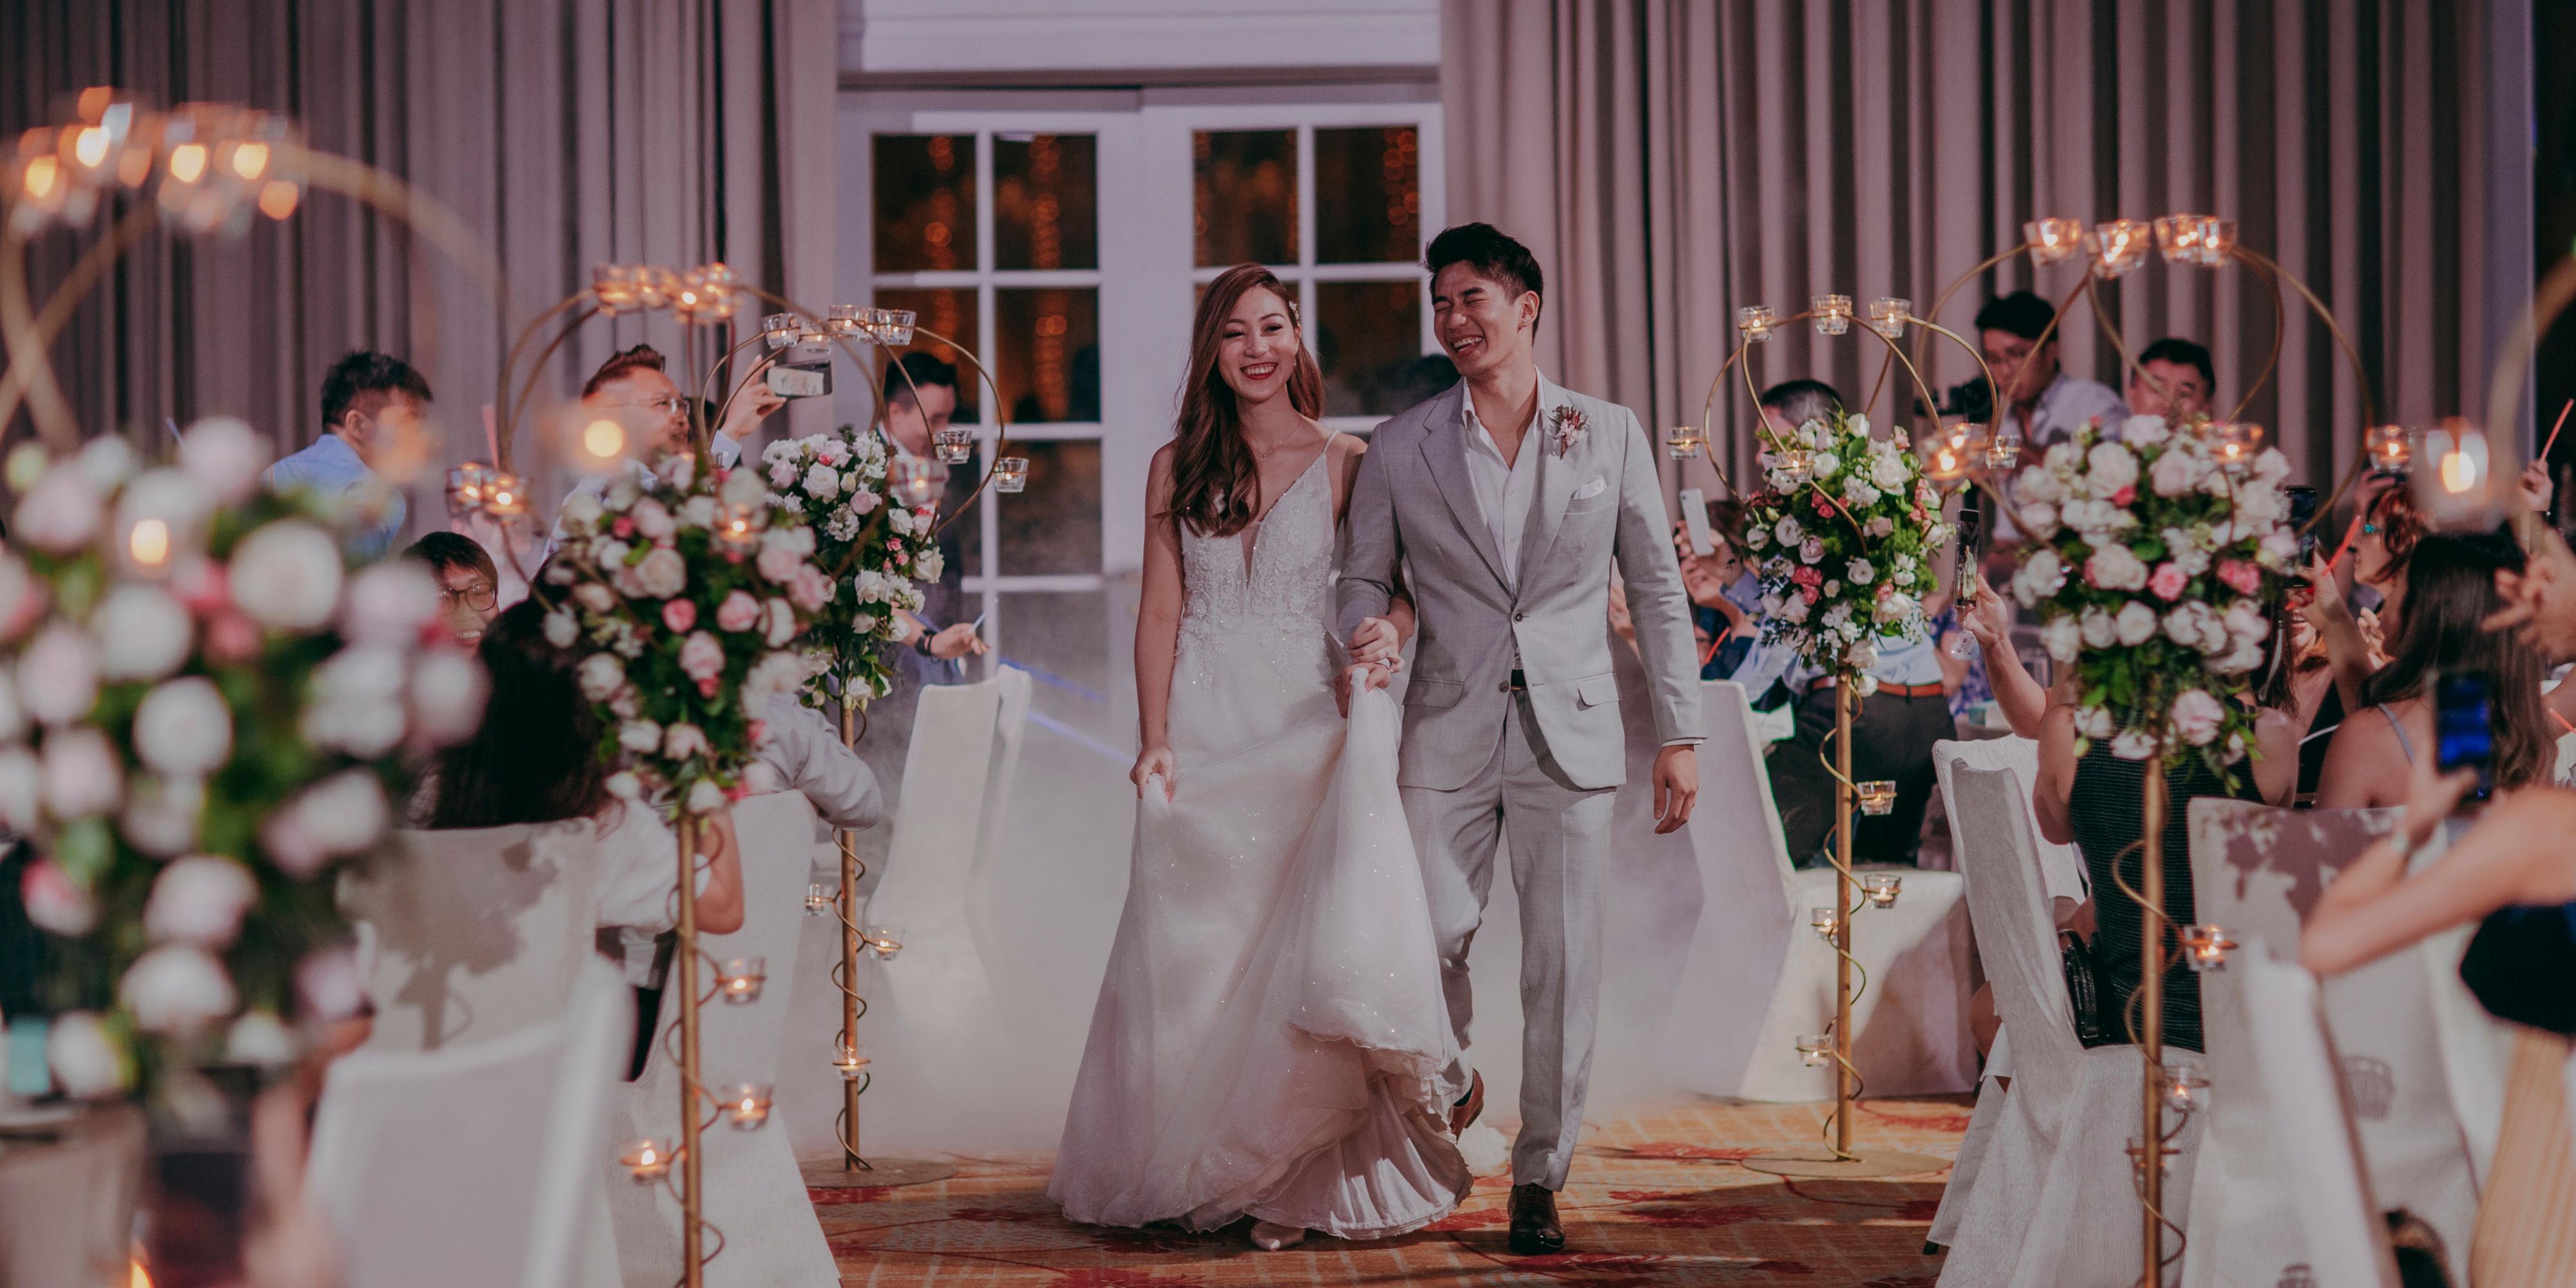 At InterContinental® Singapore, we believe that no two weddings are the same. Be it a lavish affair involving hundreds of guests in the Grand Ballroom, or a private moment shared only with the nearest and dearest, our experienced wedding team is on hand to ensure that you and your guests will be treated to a celebration like none other.